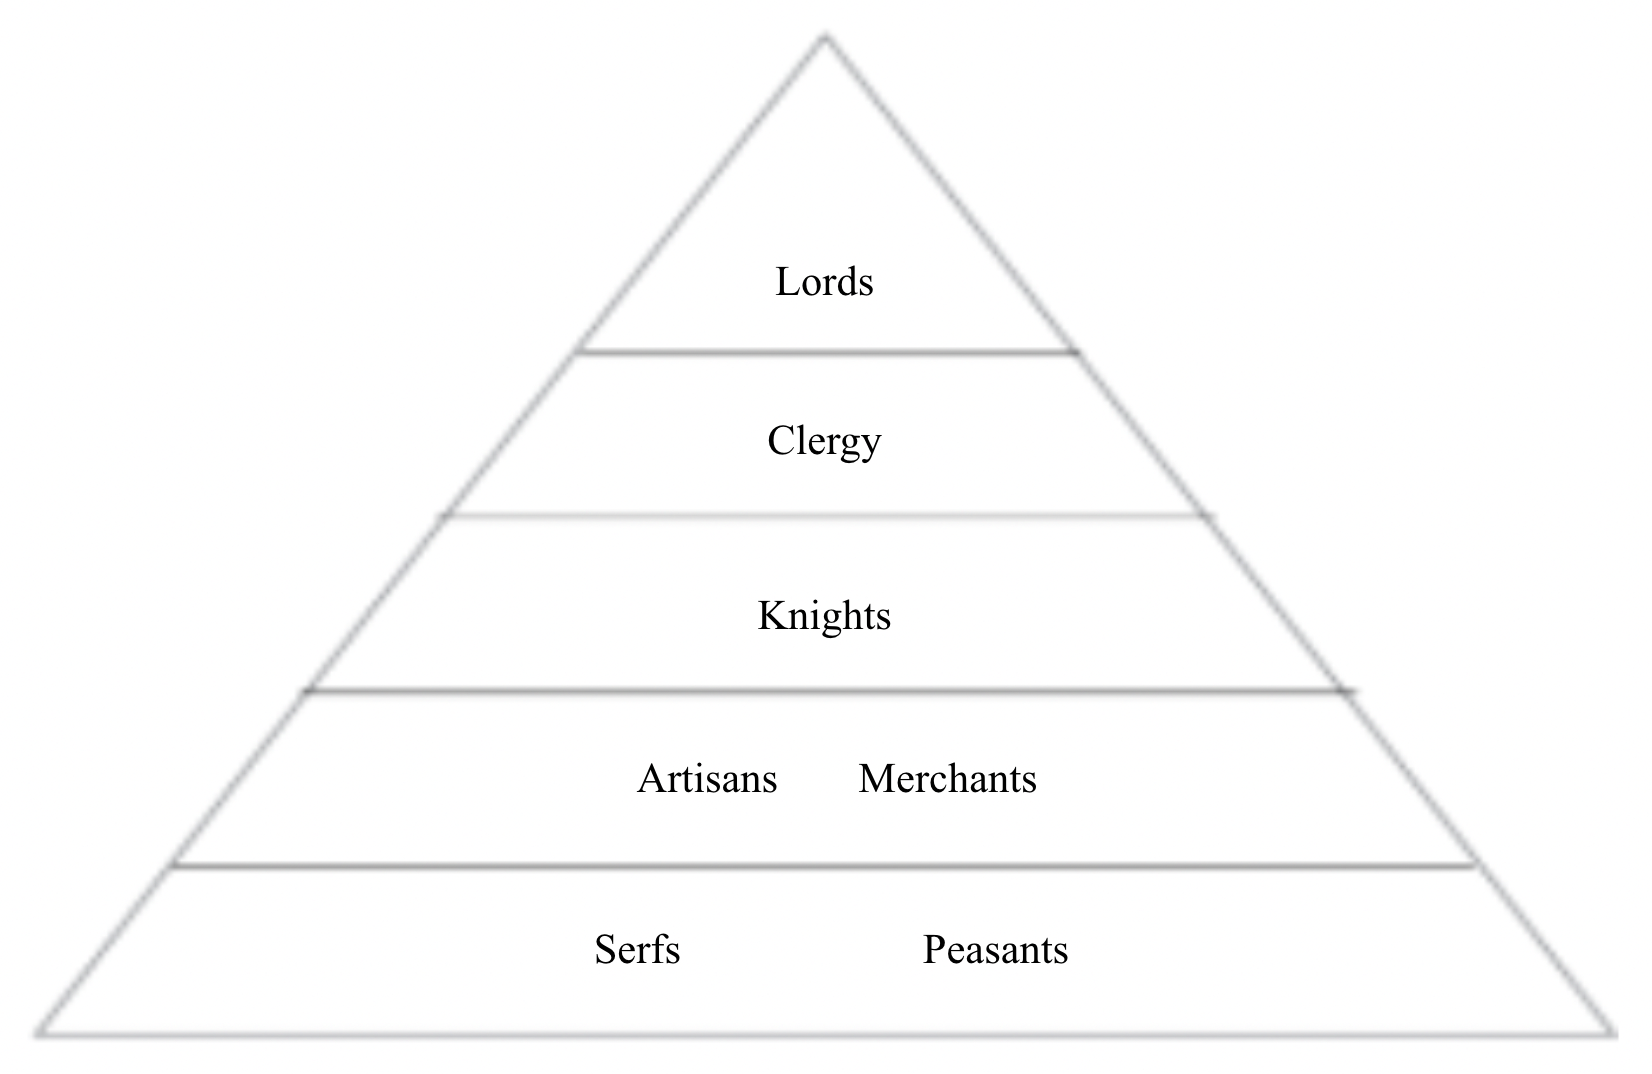 Feudalism pyramid from class. Monarchs are at the very top, above lords.